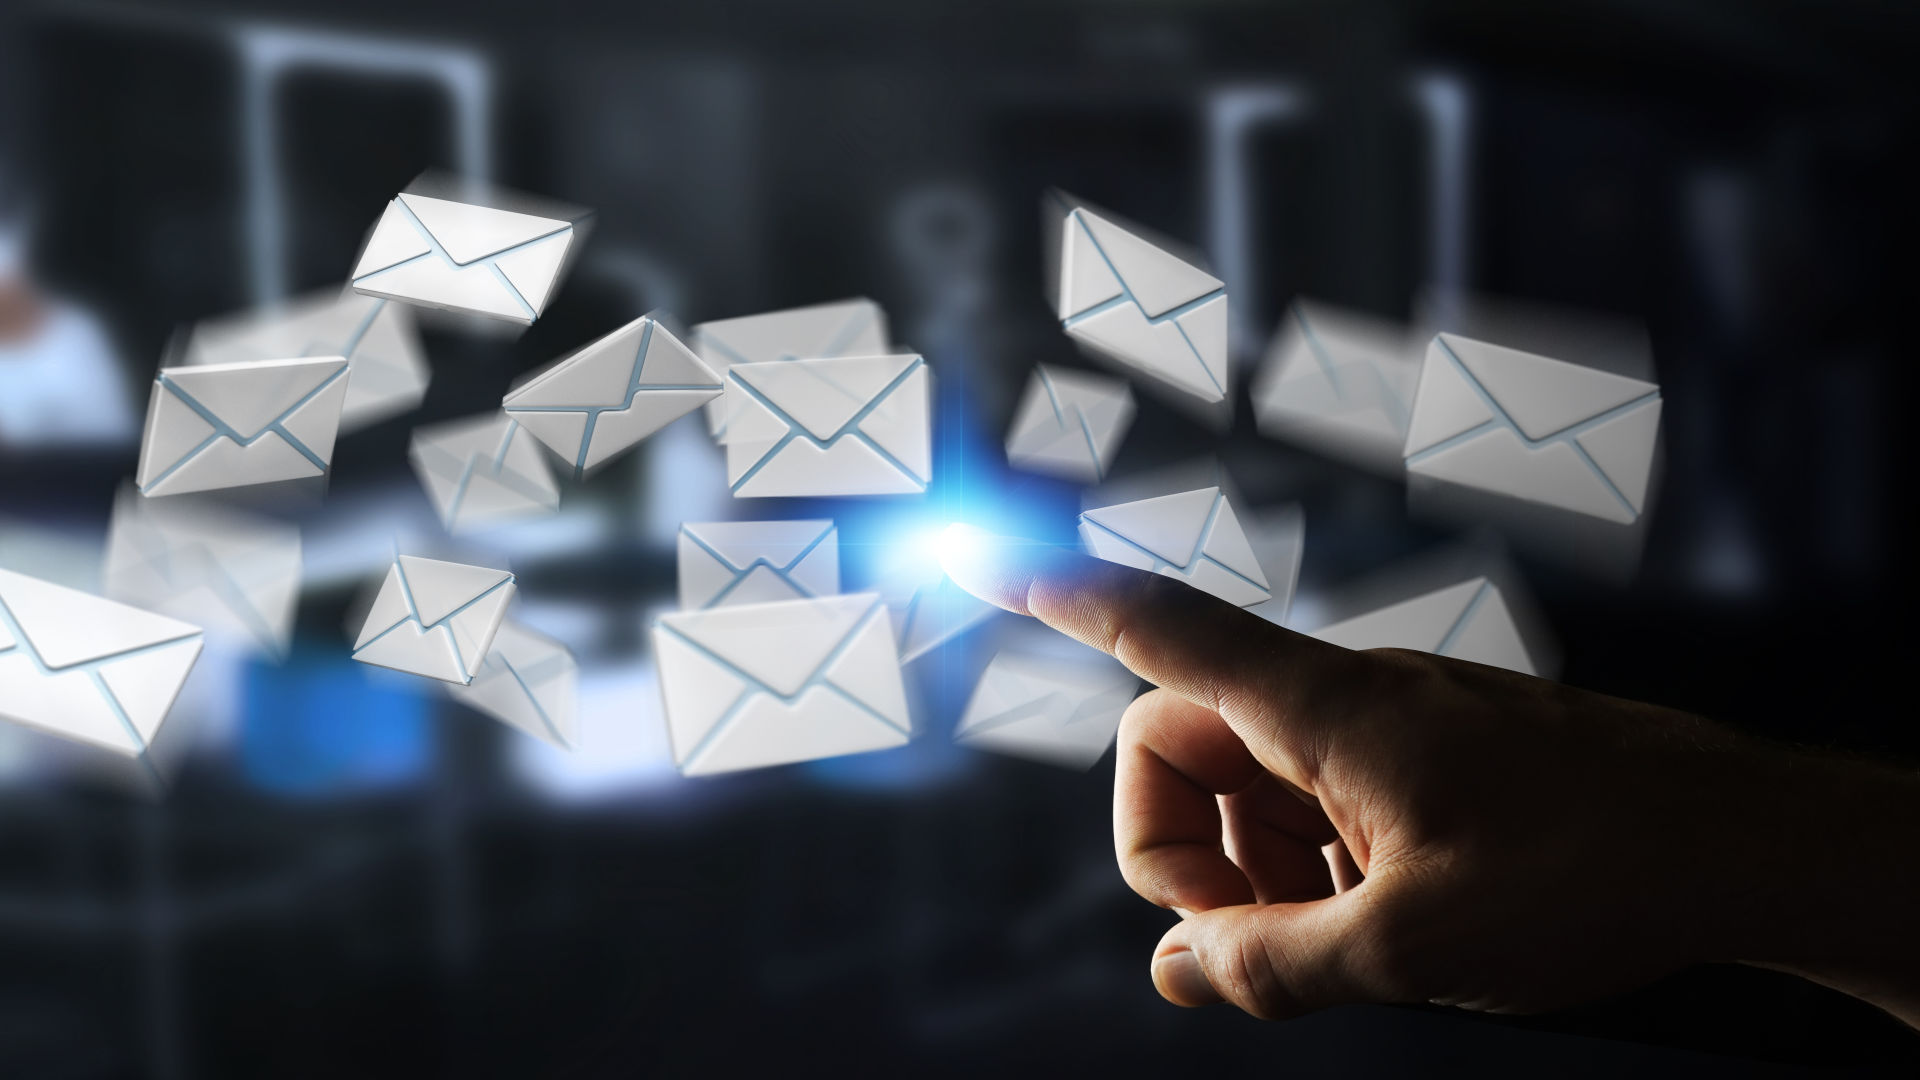 A image shows a hand is pointing emails in the air.